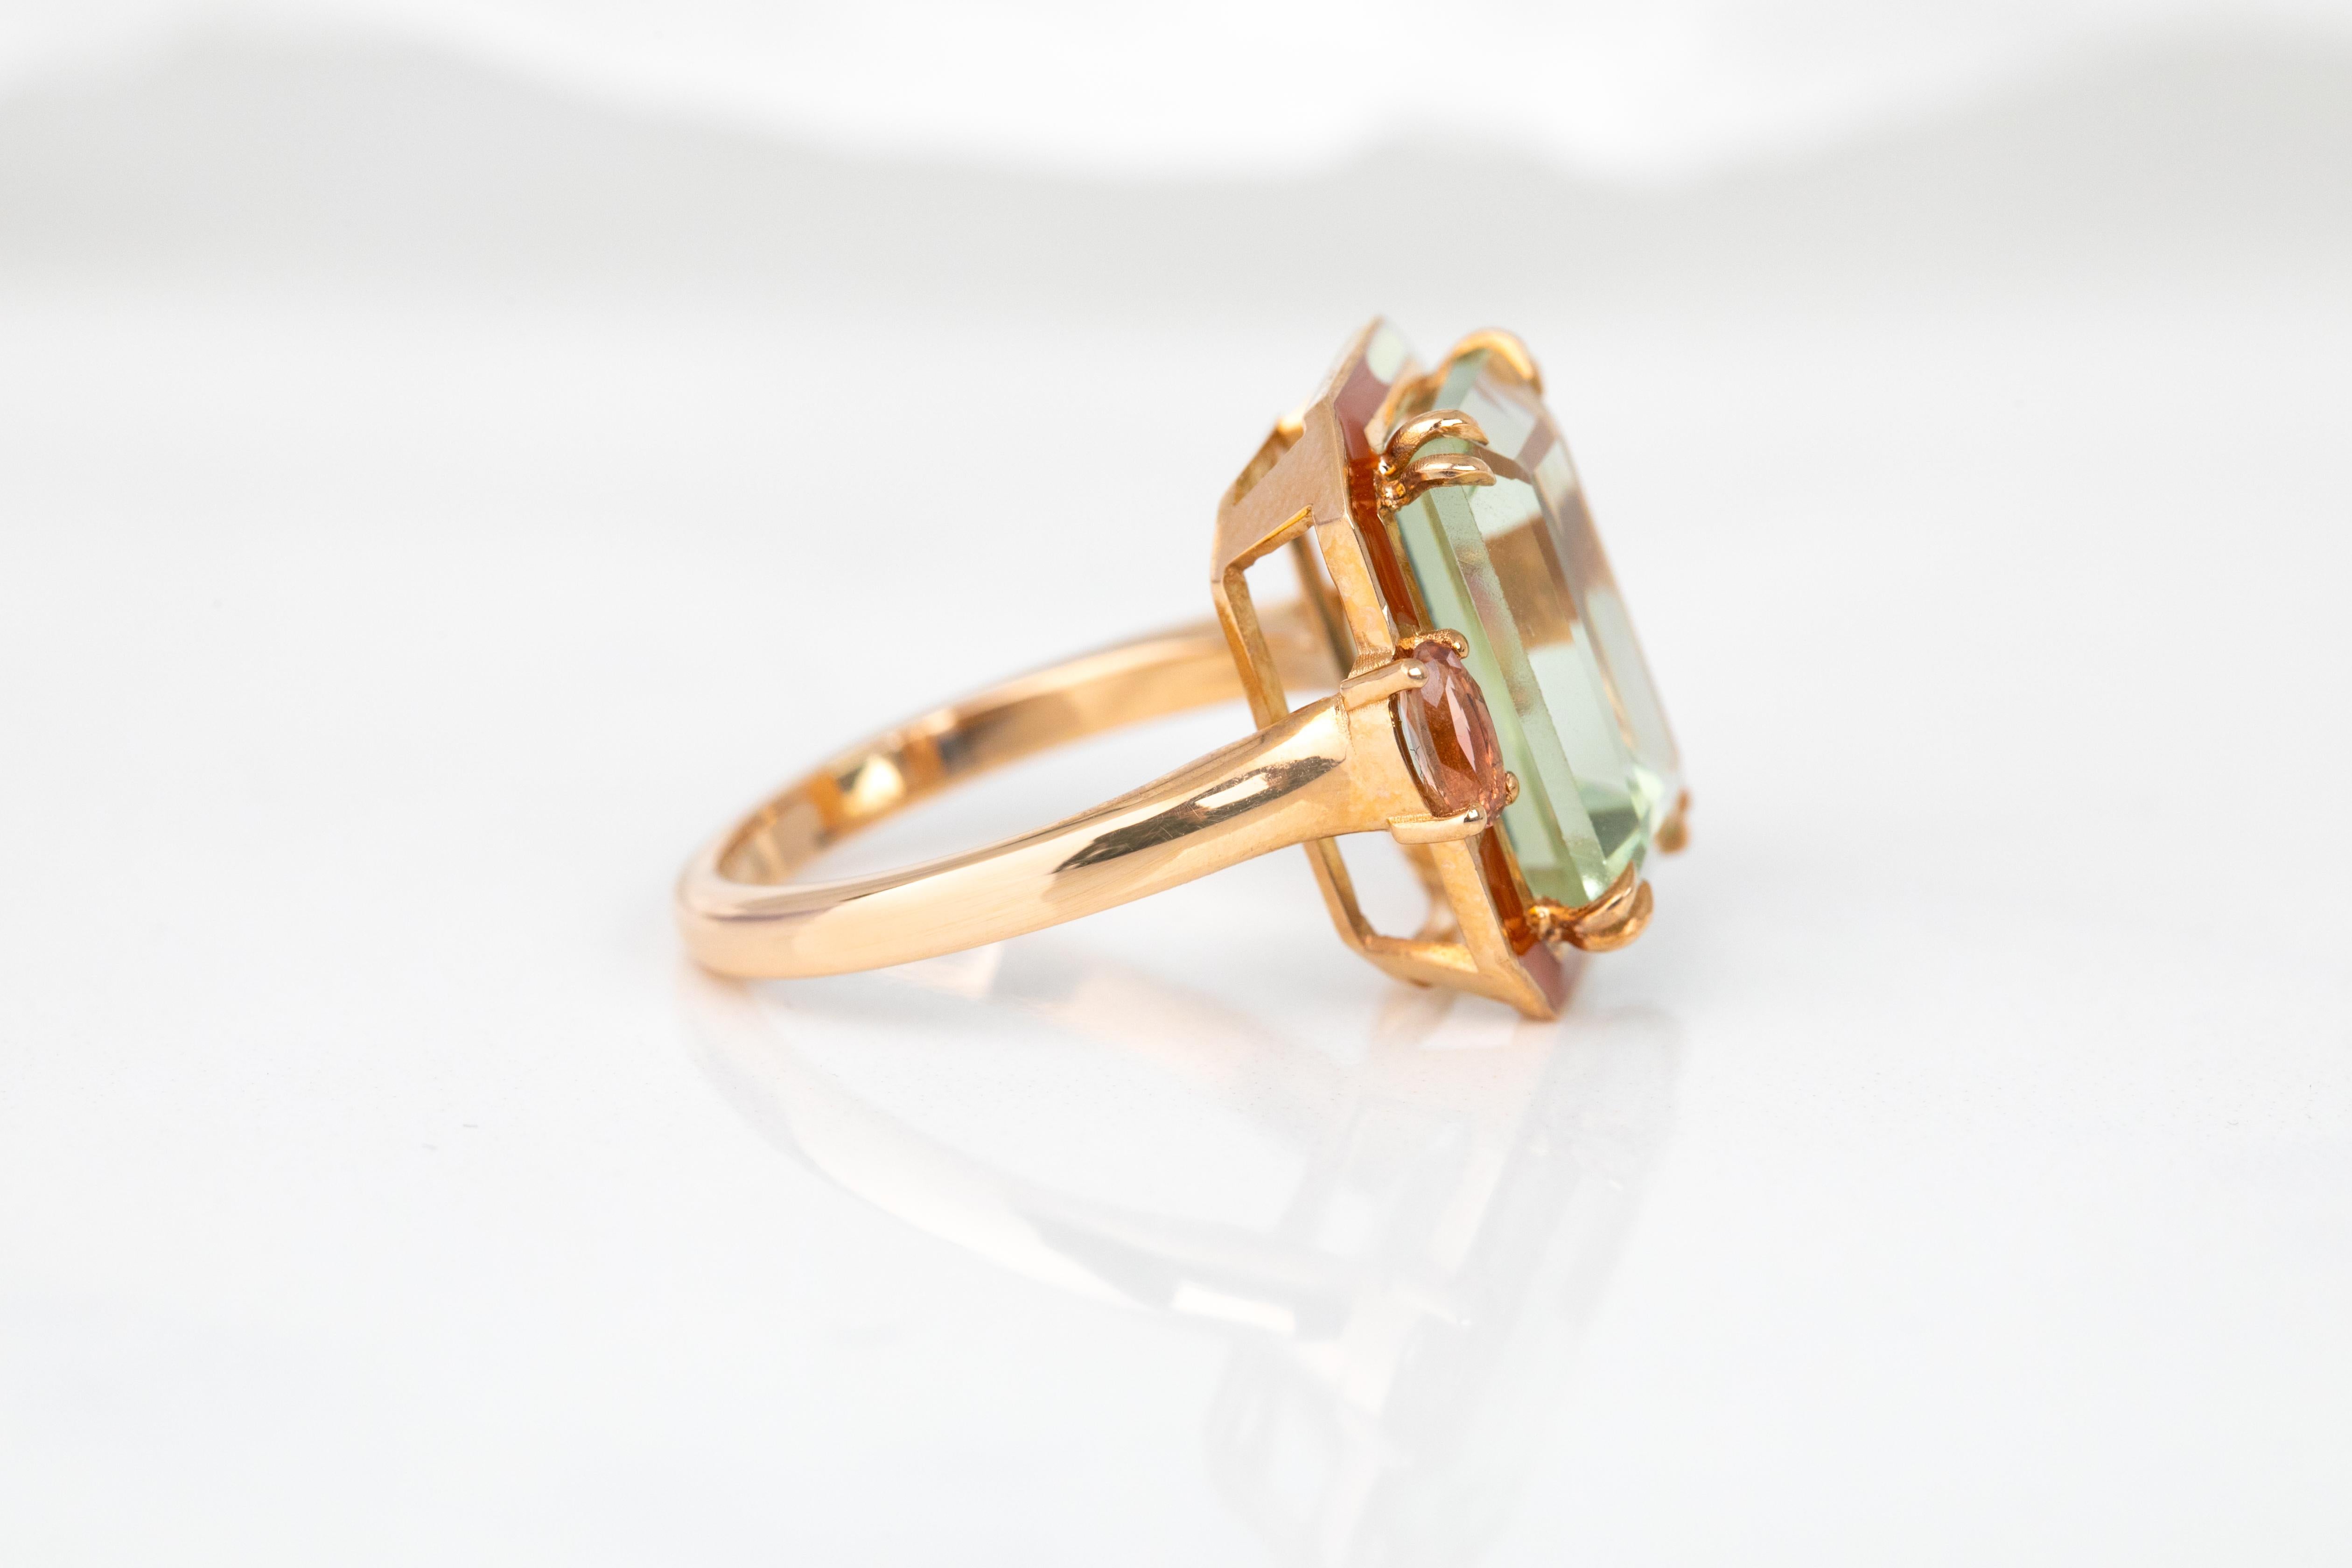 For Sale:  Artdeco Style Ring, 14k Solid Gold, Green Amethyst and Pink Tourmaline Stone Ring 16